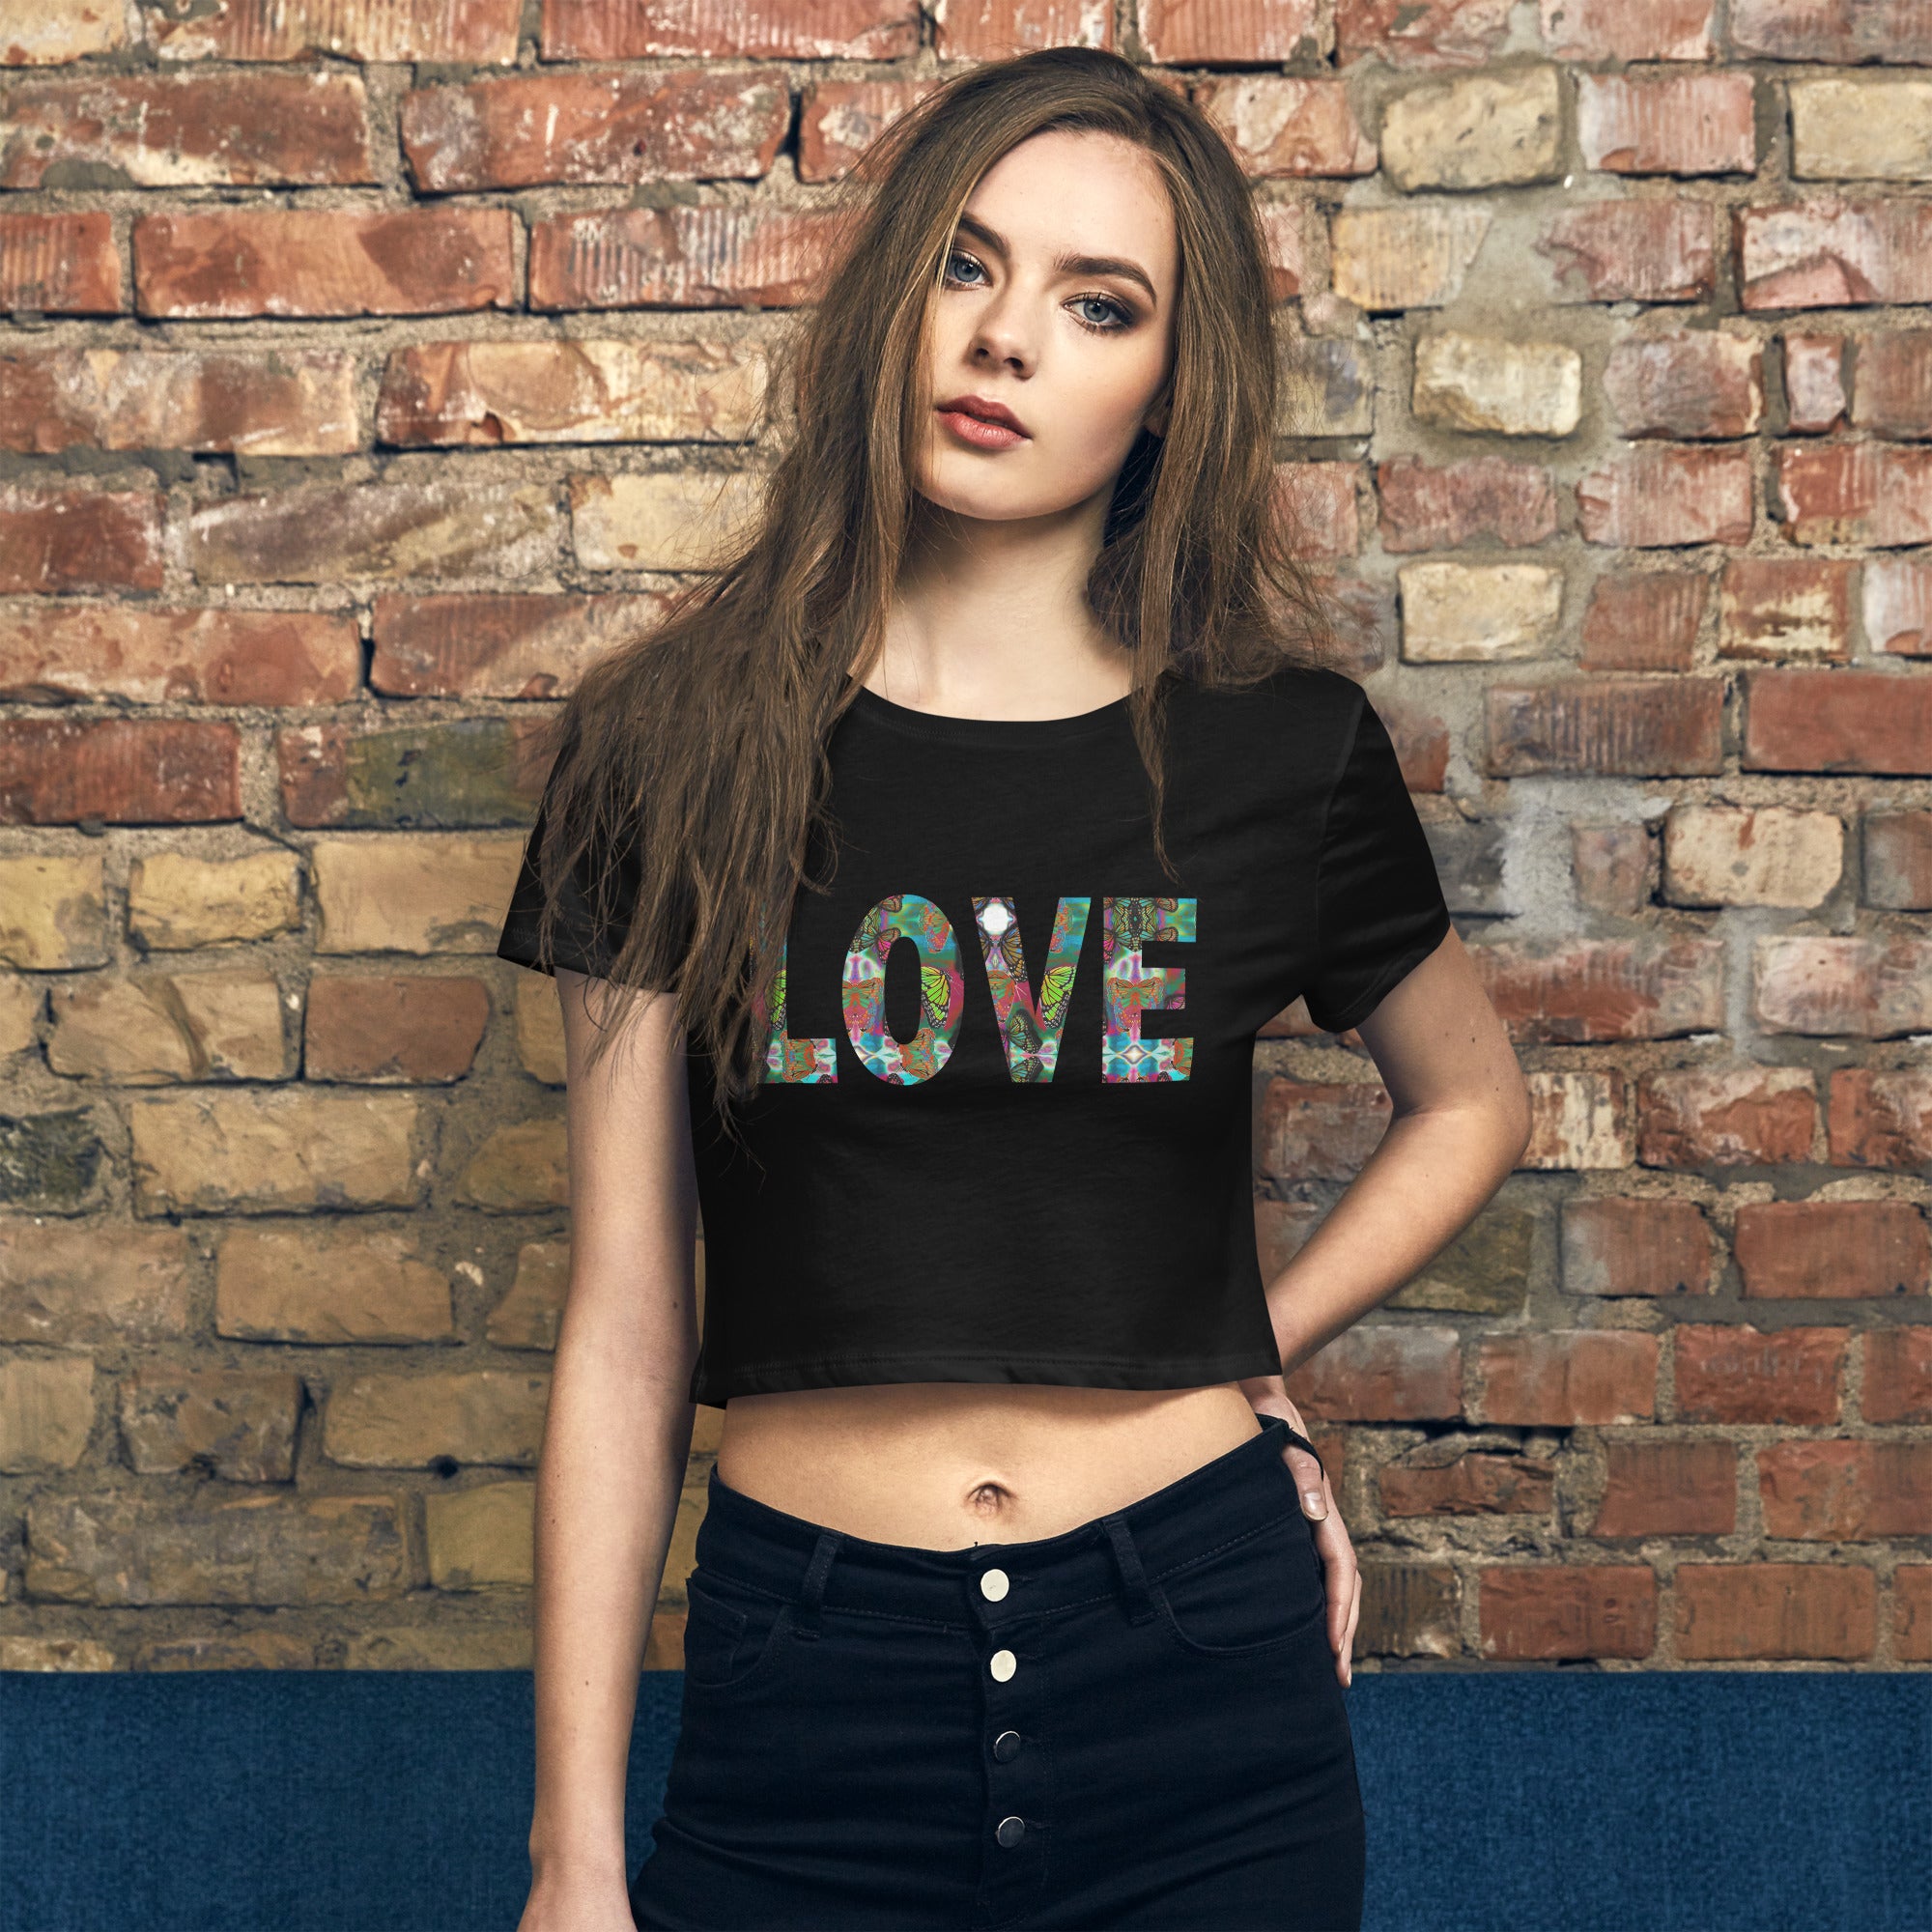 LOVE ~ Women’s Graphic Crop Tee, Butterfly Word Art Top, Black or White